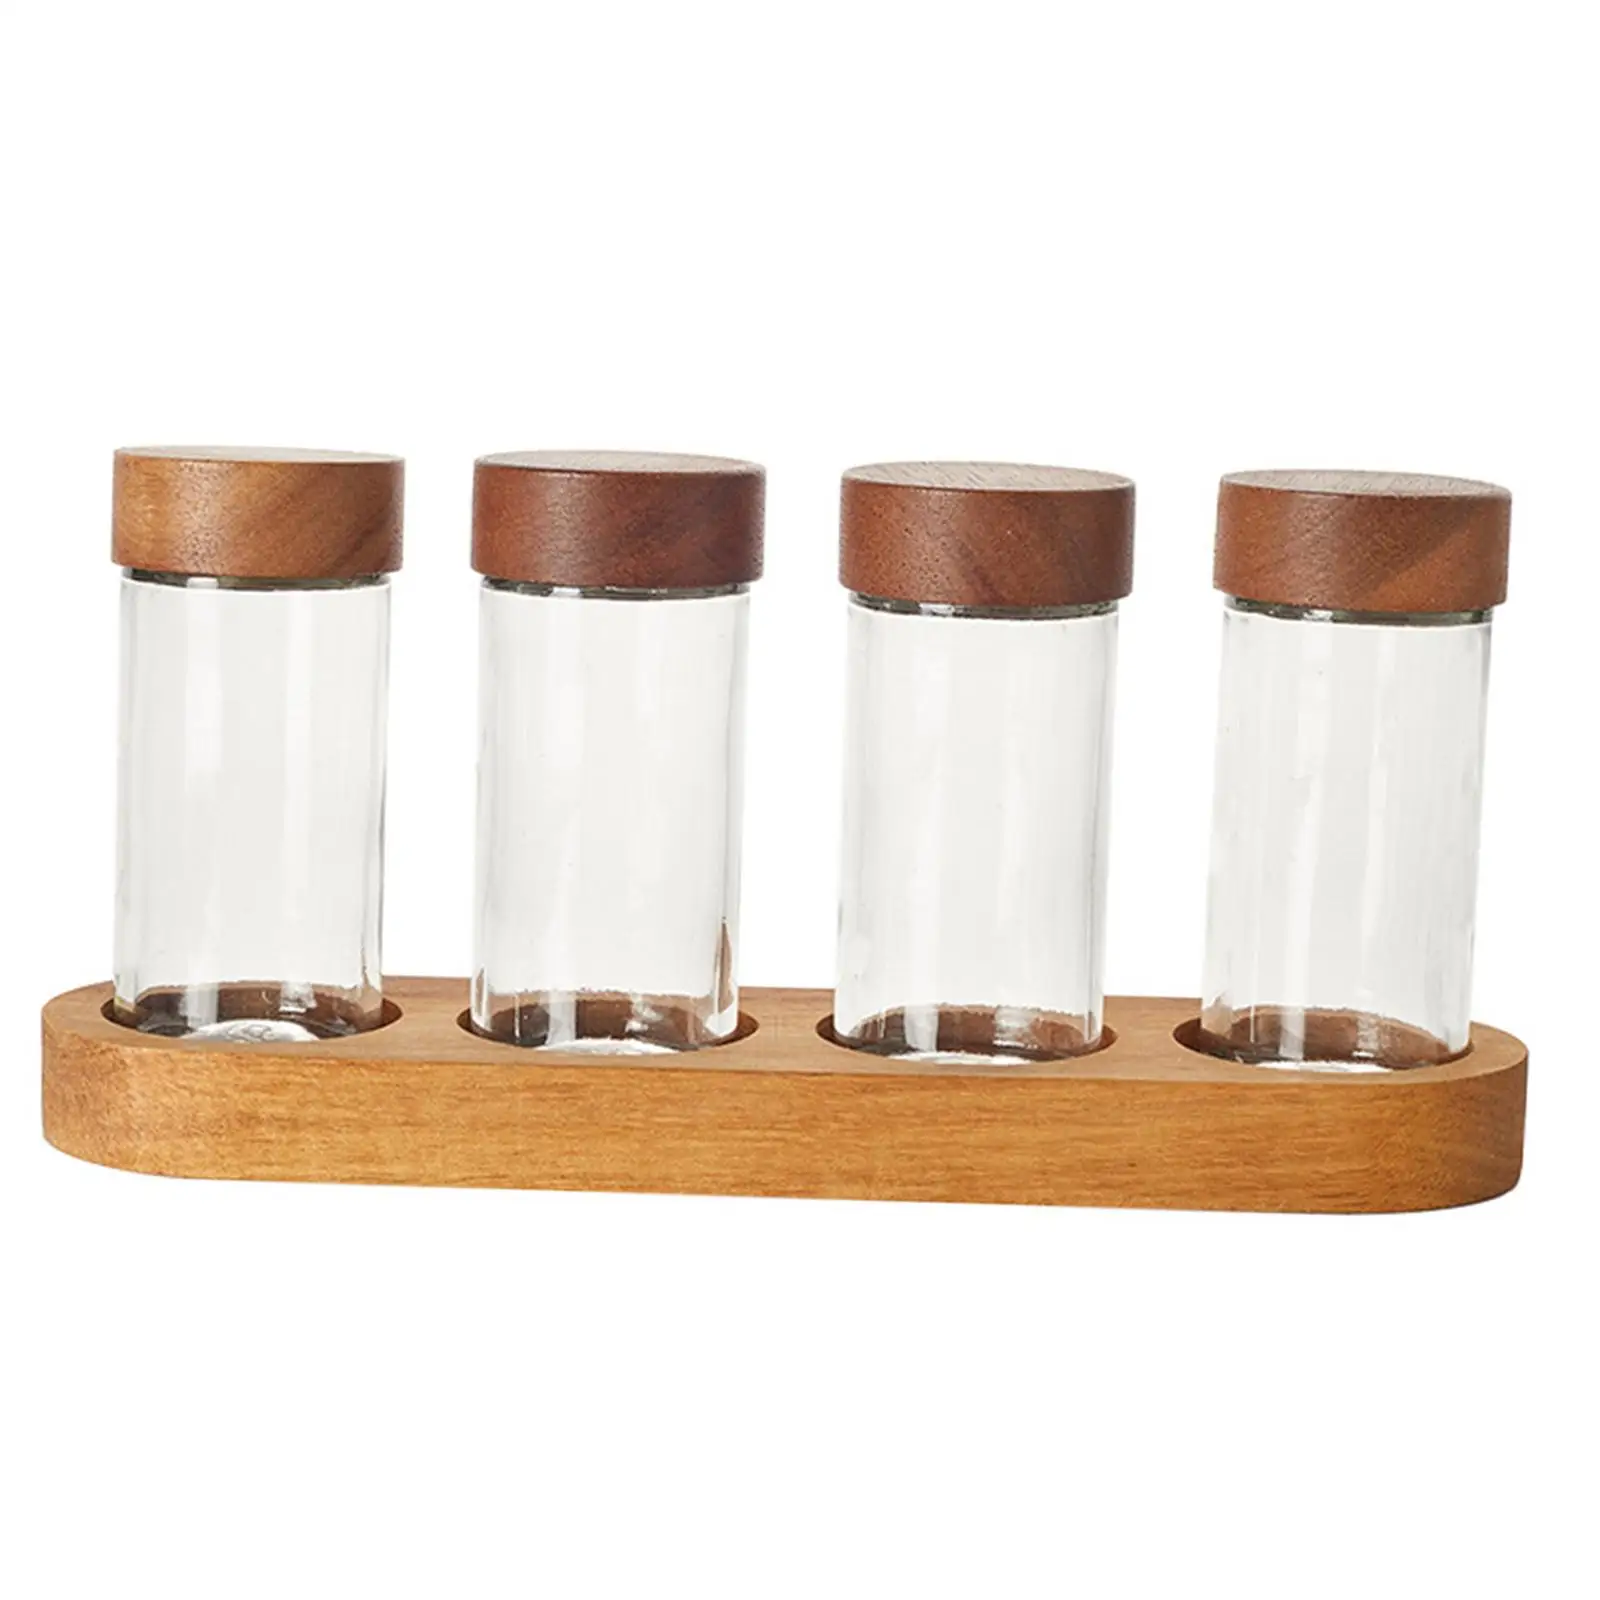 4 Pieces Condiment Jars Set Food Storage Canister Organizer Coffee Bean Storage Tubes for Tea Sugar Pepper Coffee Beans Spice